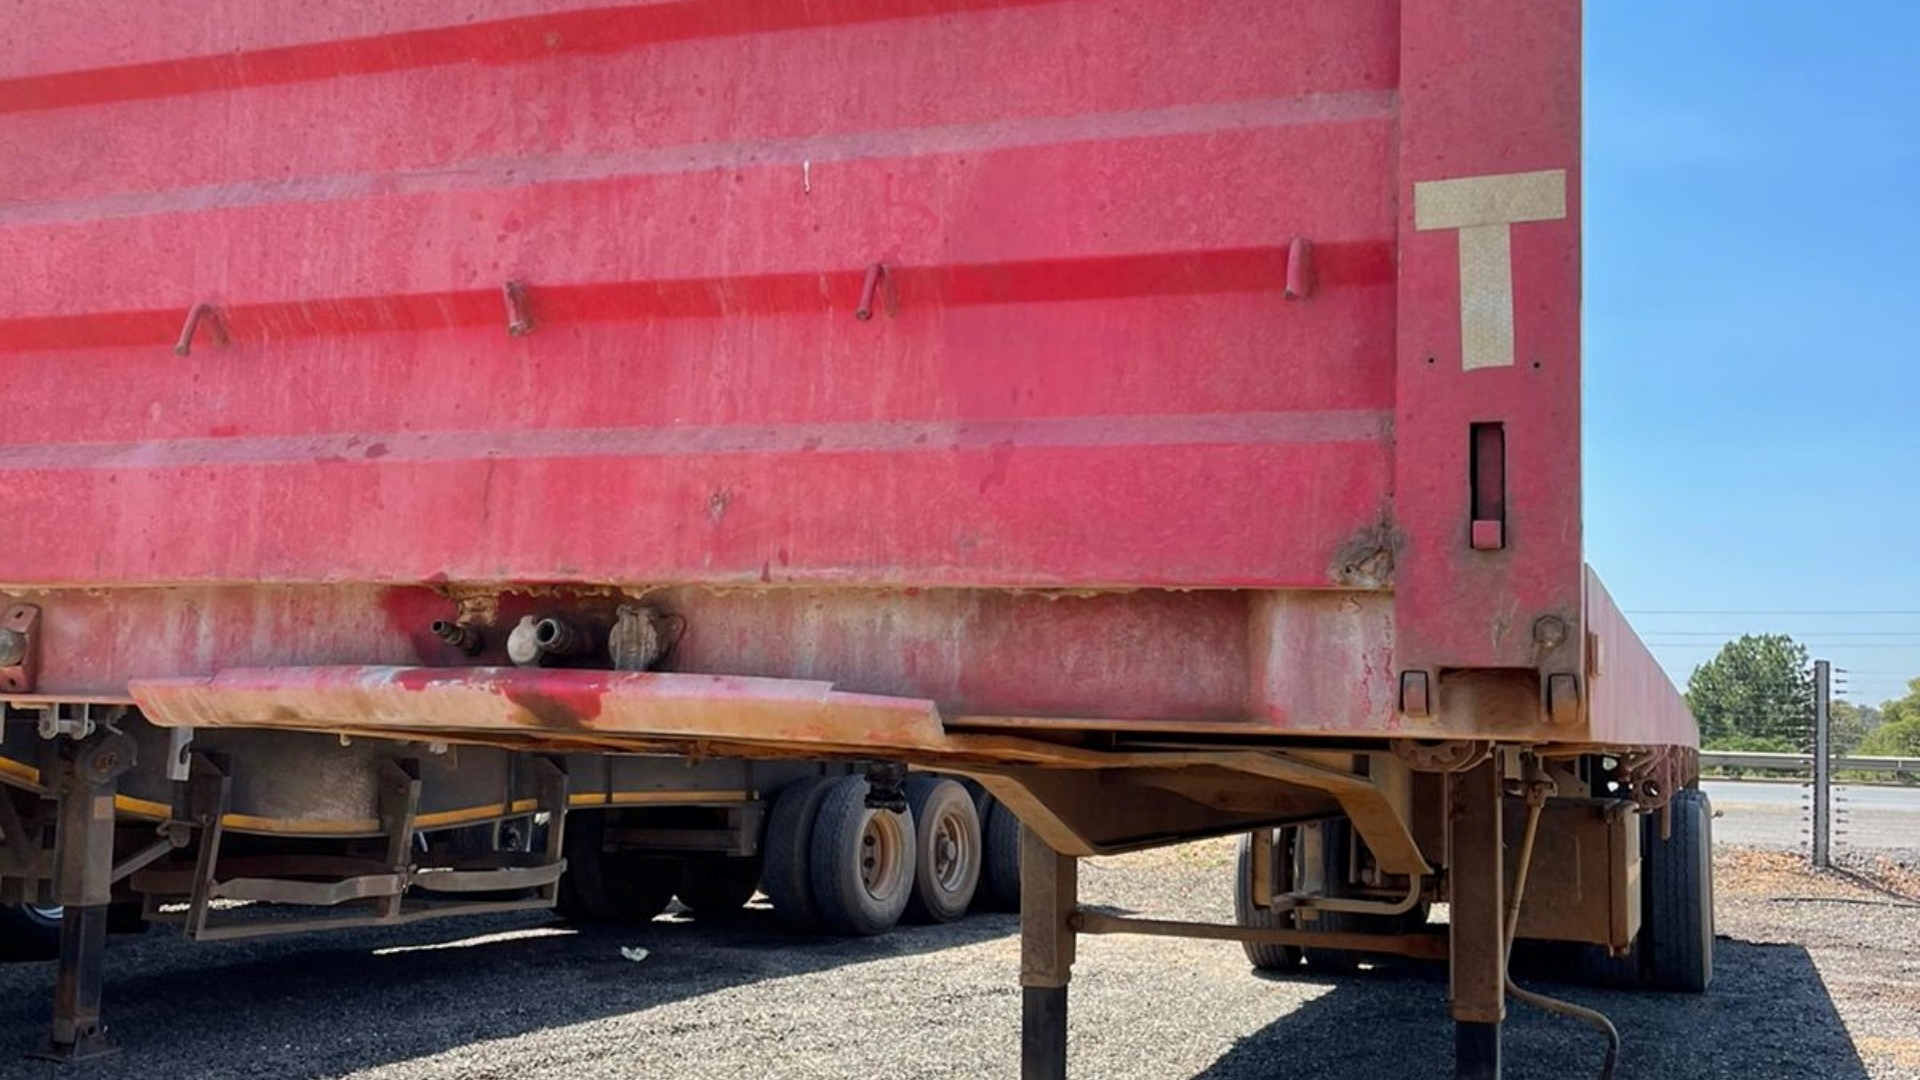 Top Trailer Trailers Flat deck TOP TRAILER FLAT DECK TRI AXLE 2007 for sale by ZA Trucks and Trailers Sales | Truck & Trailer Marketplaces